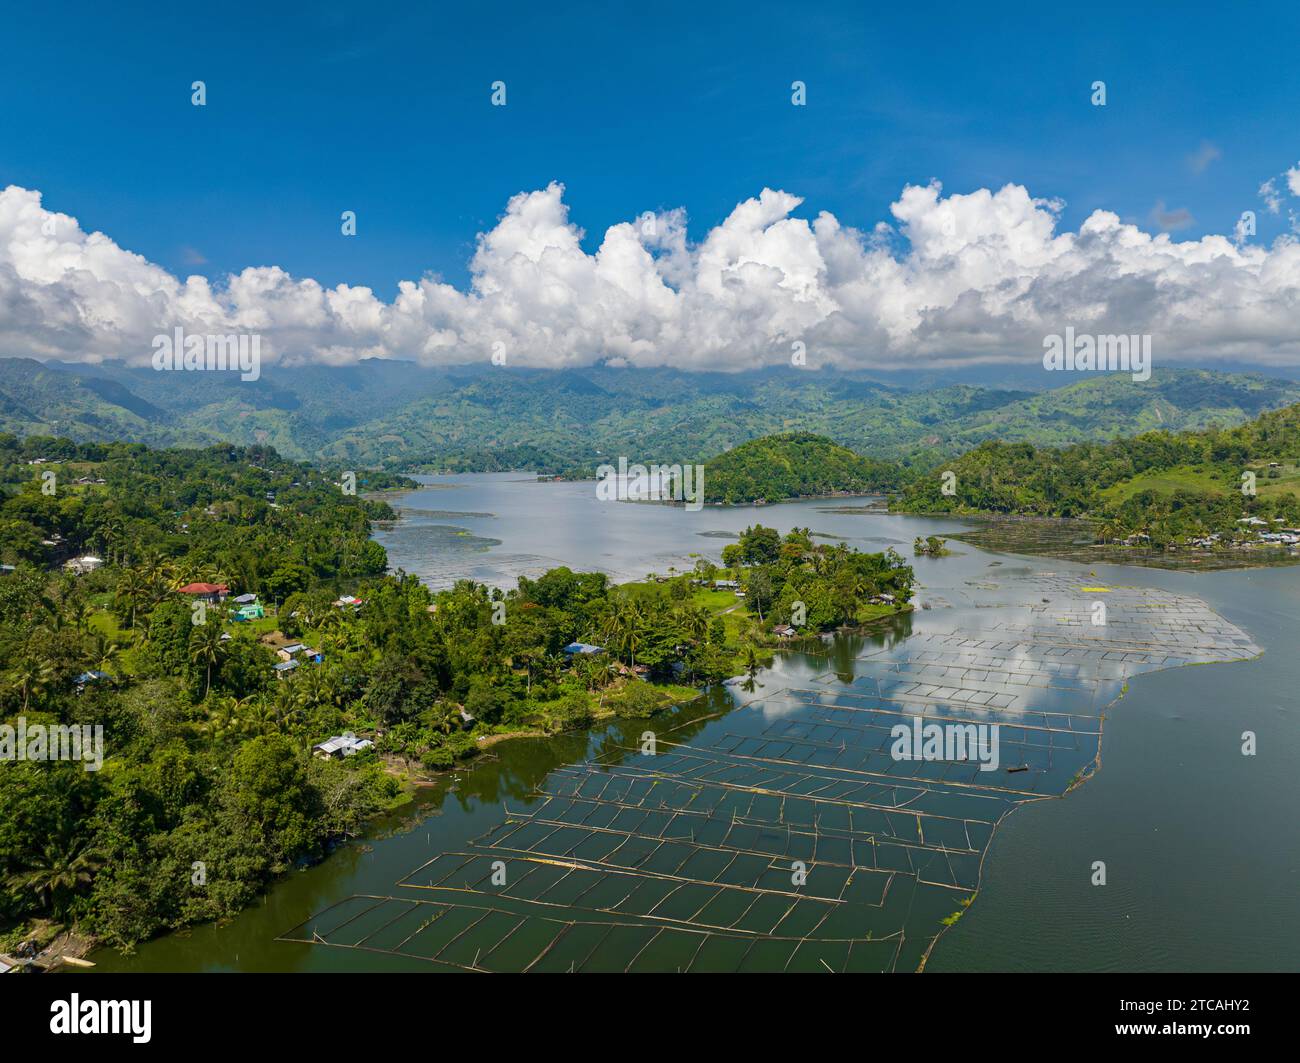 Lake Sebu in South Cotabato, beautiful landscape with mountain rainforest. Mindanao, Philippines. Top view. Travel concept. Stock Photo